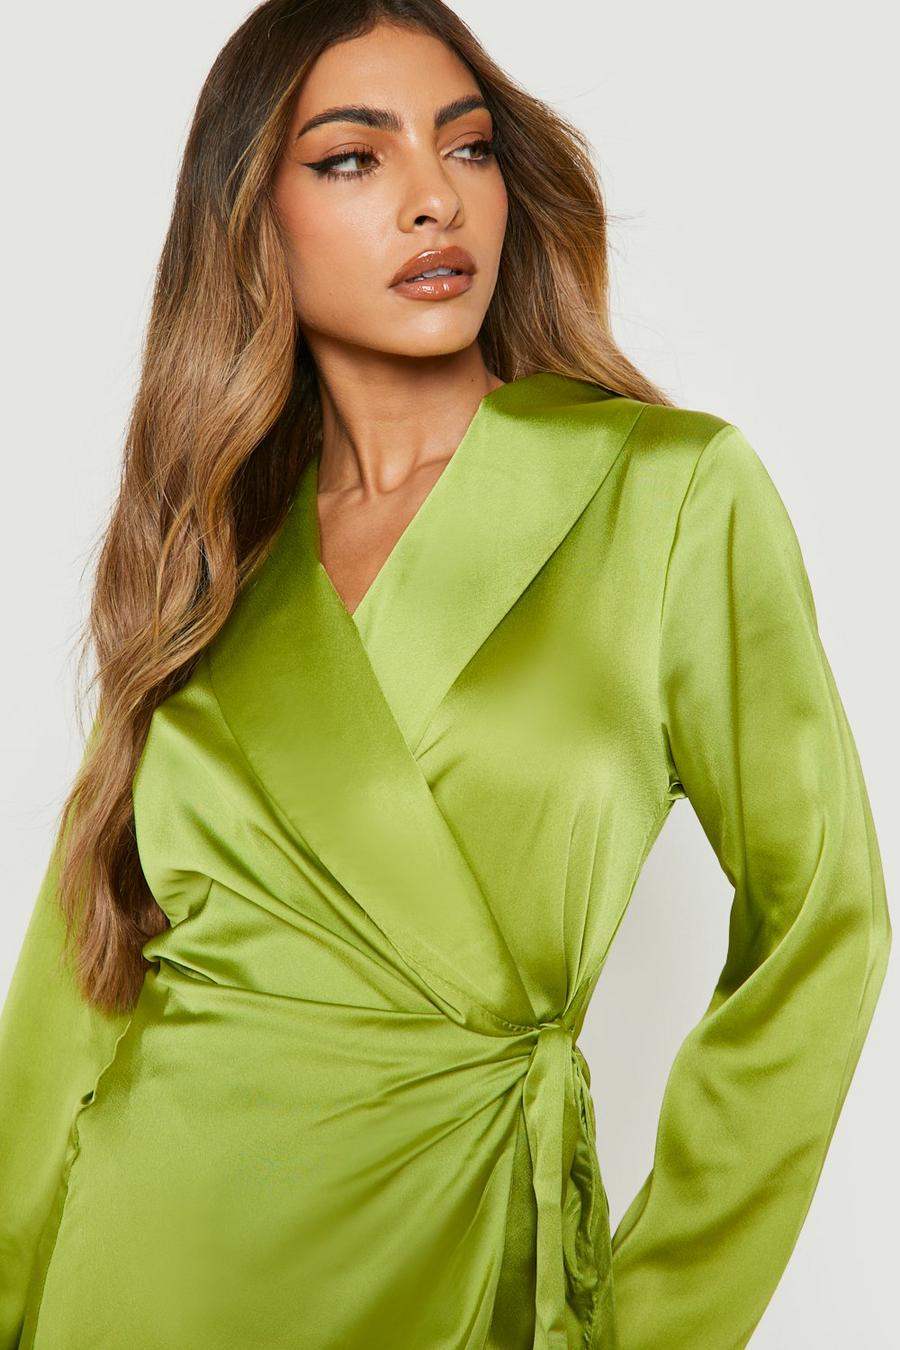 Chartreuse Satin Collared Wrap Dress